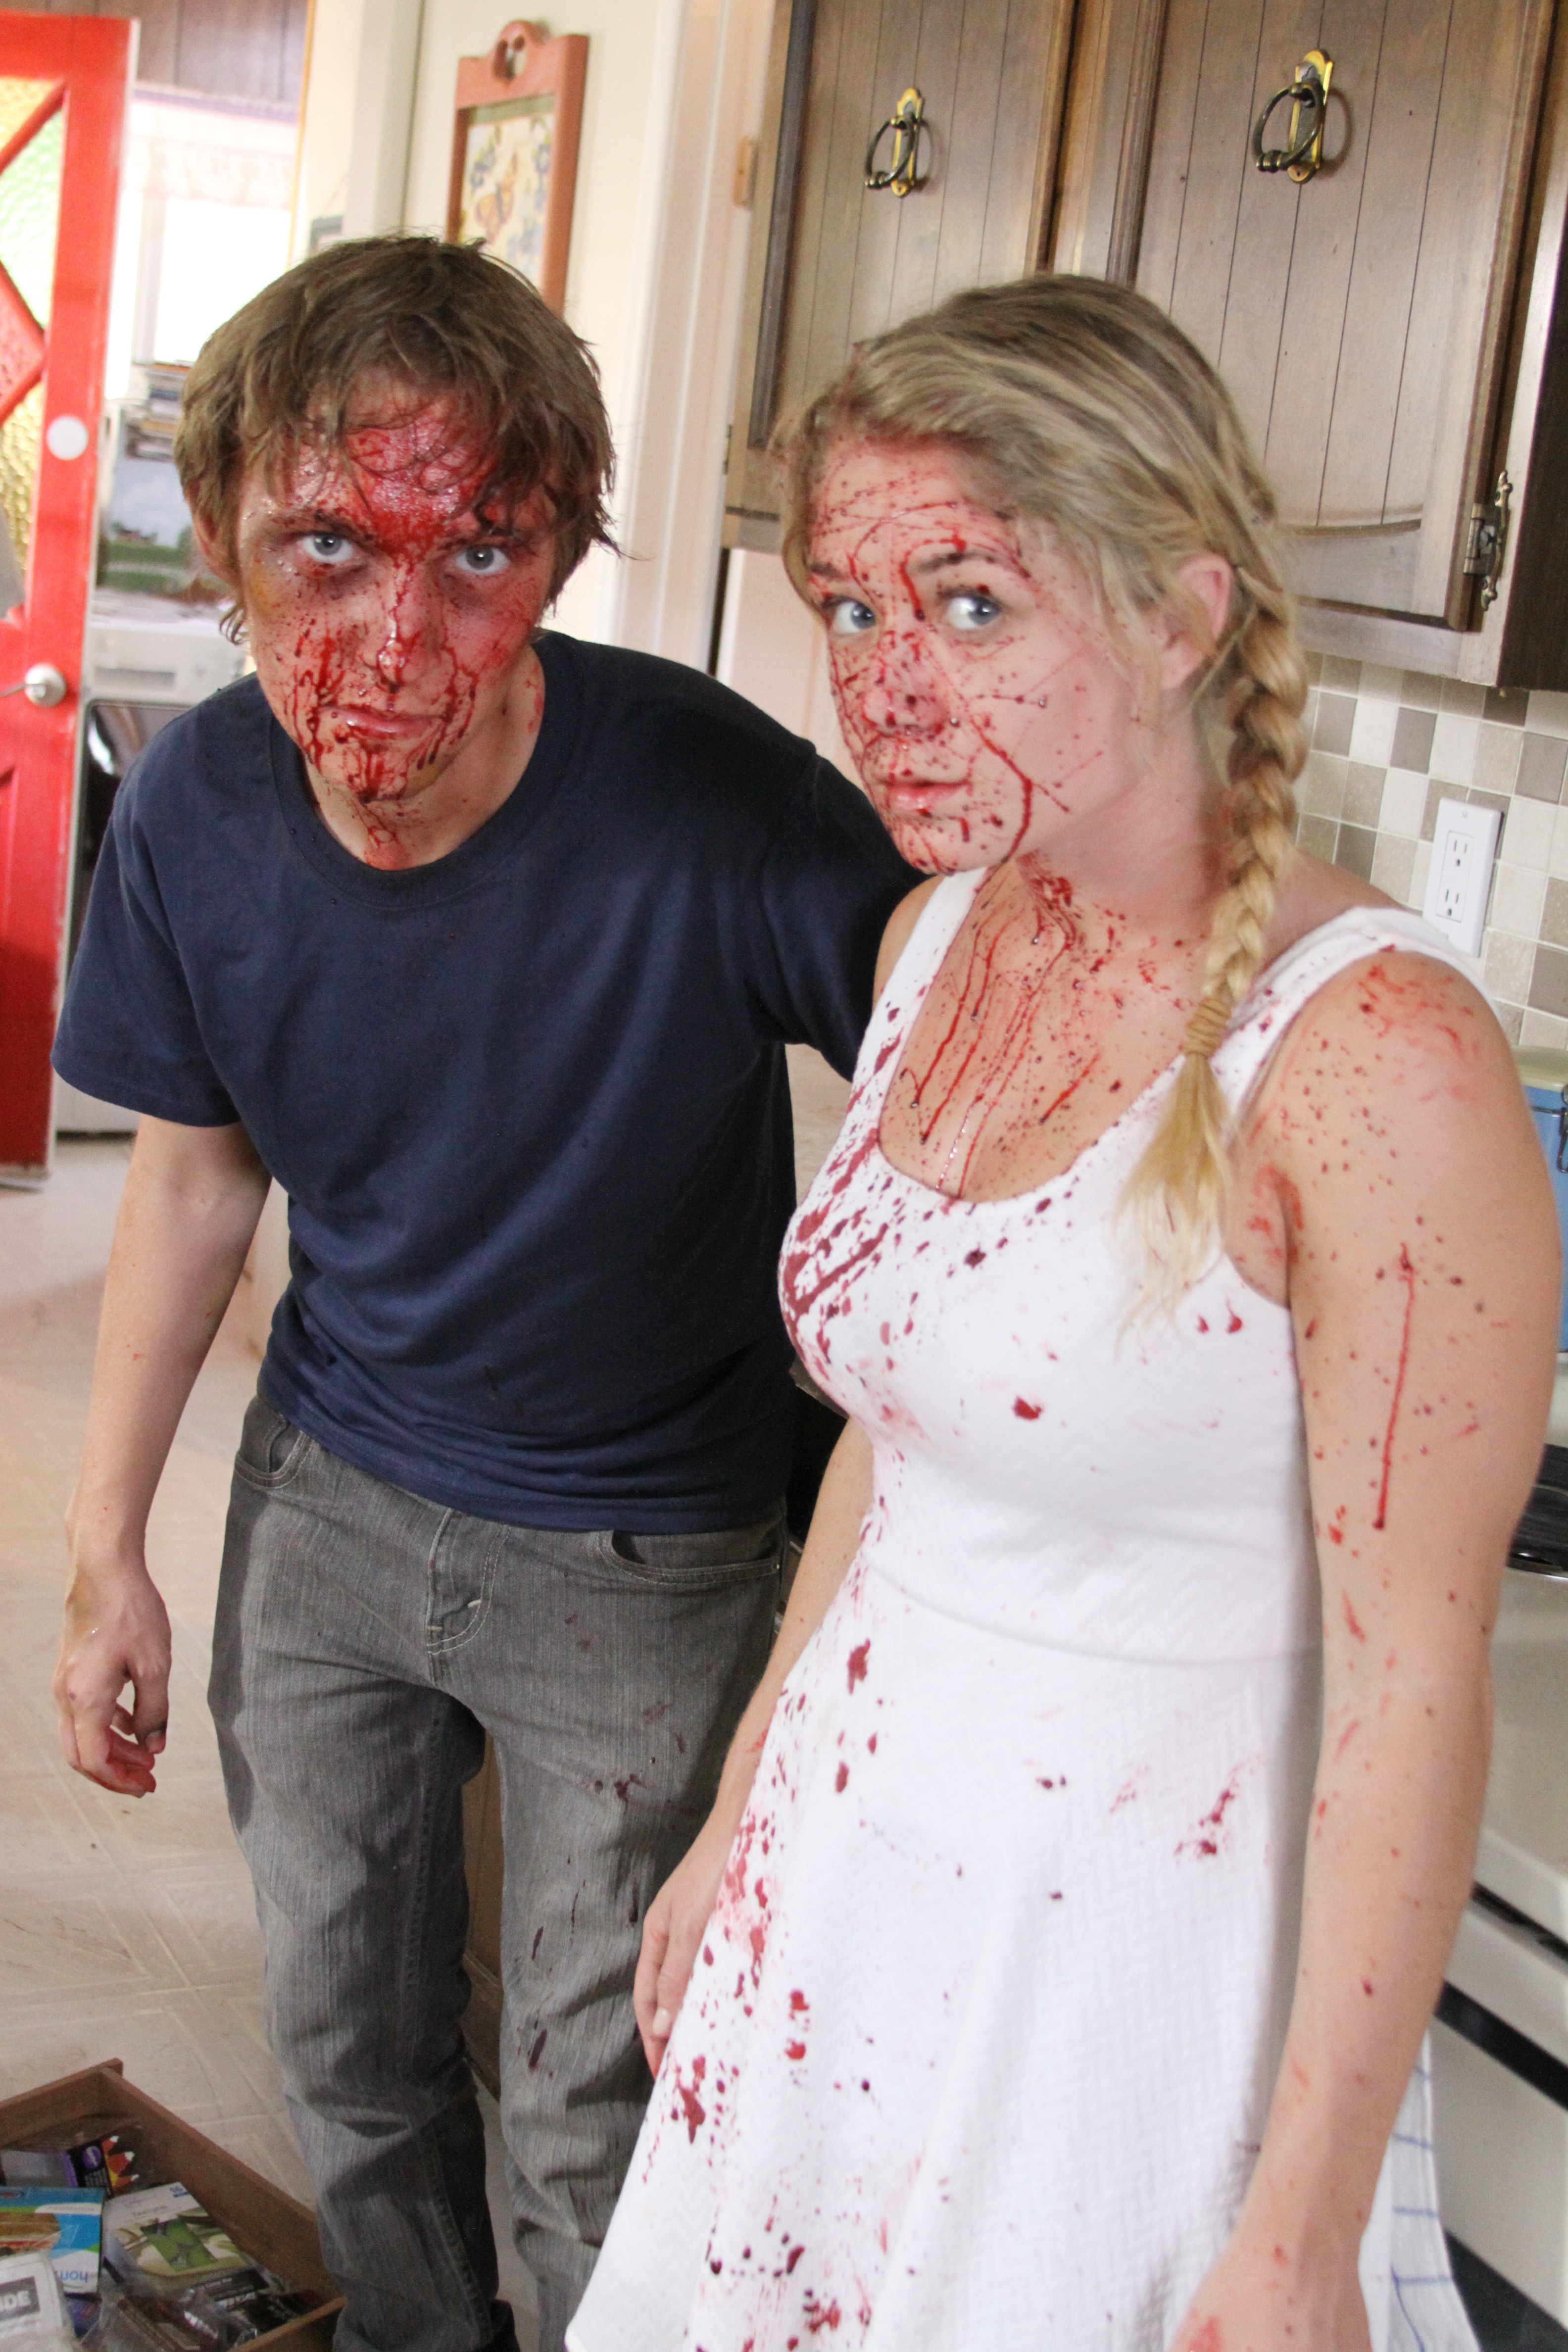 Joey Bell as Ethan Cooper and Mikayla Gibson as Audra West on the set of Betrothed